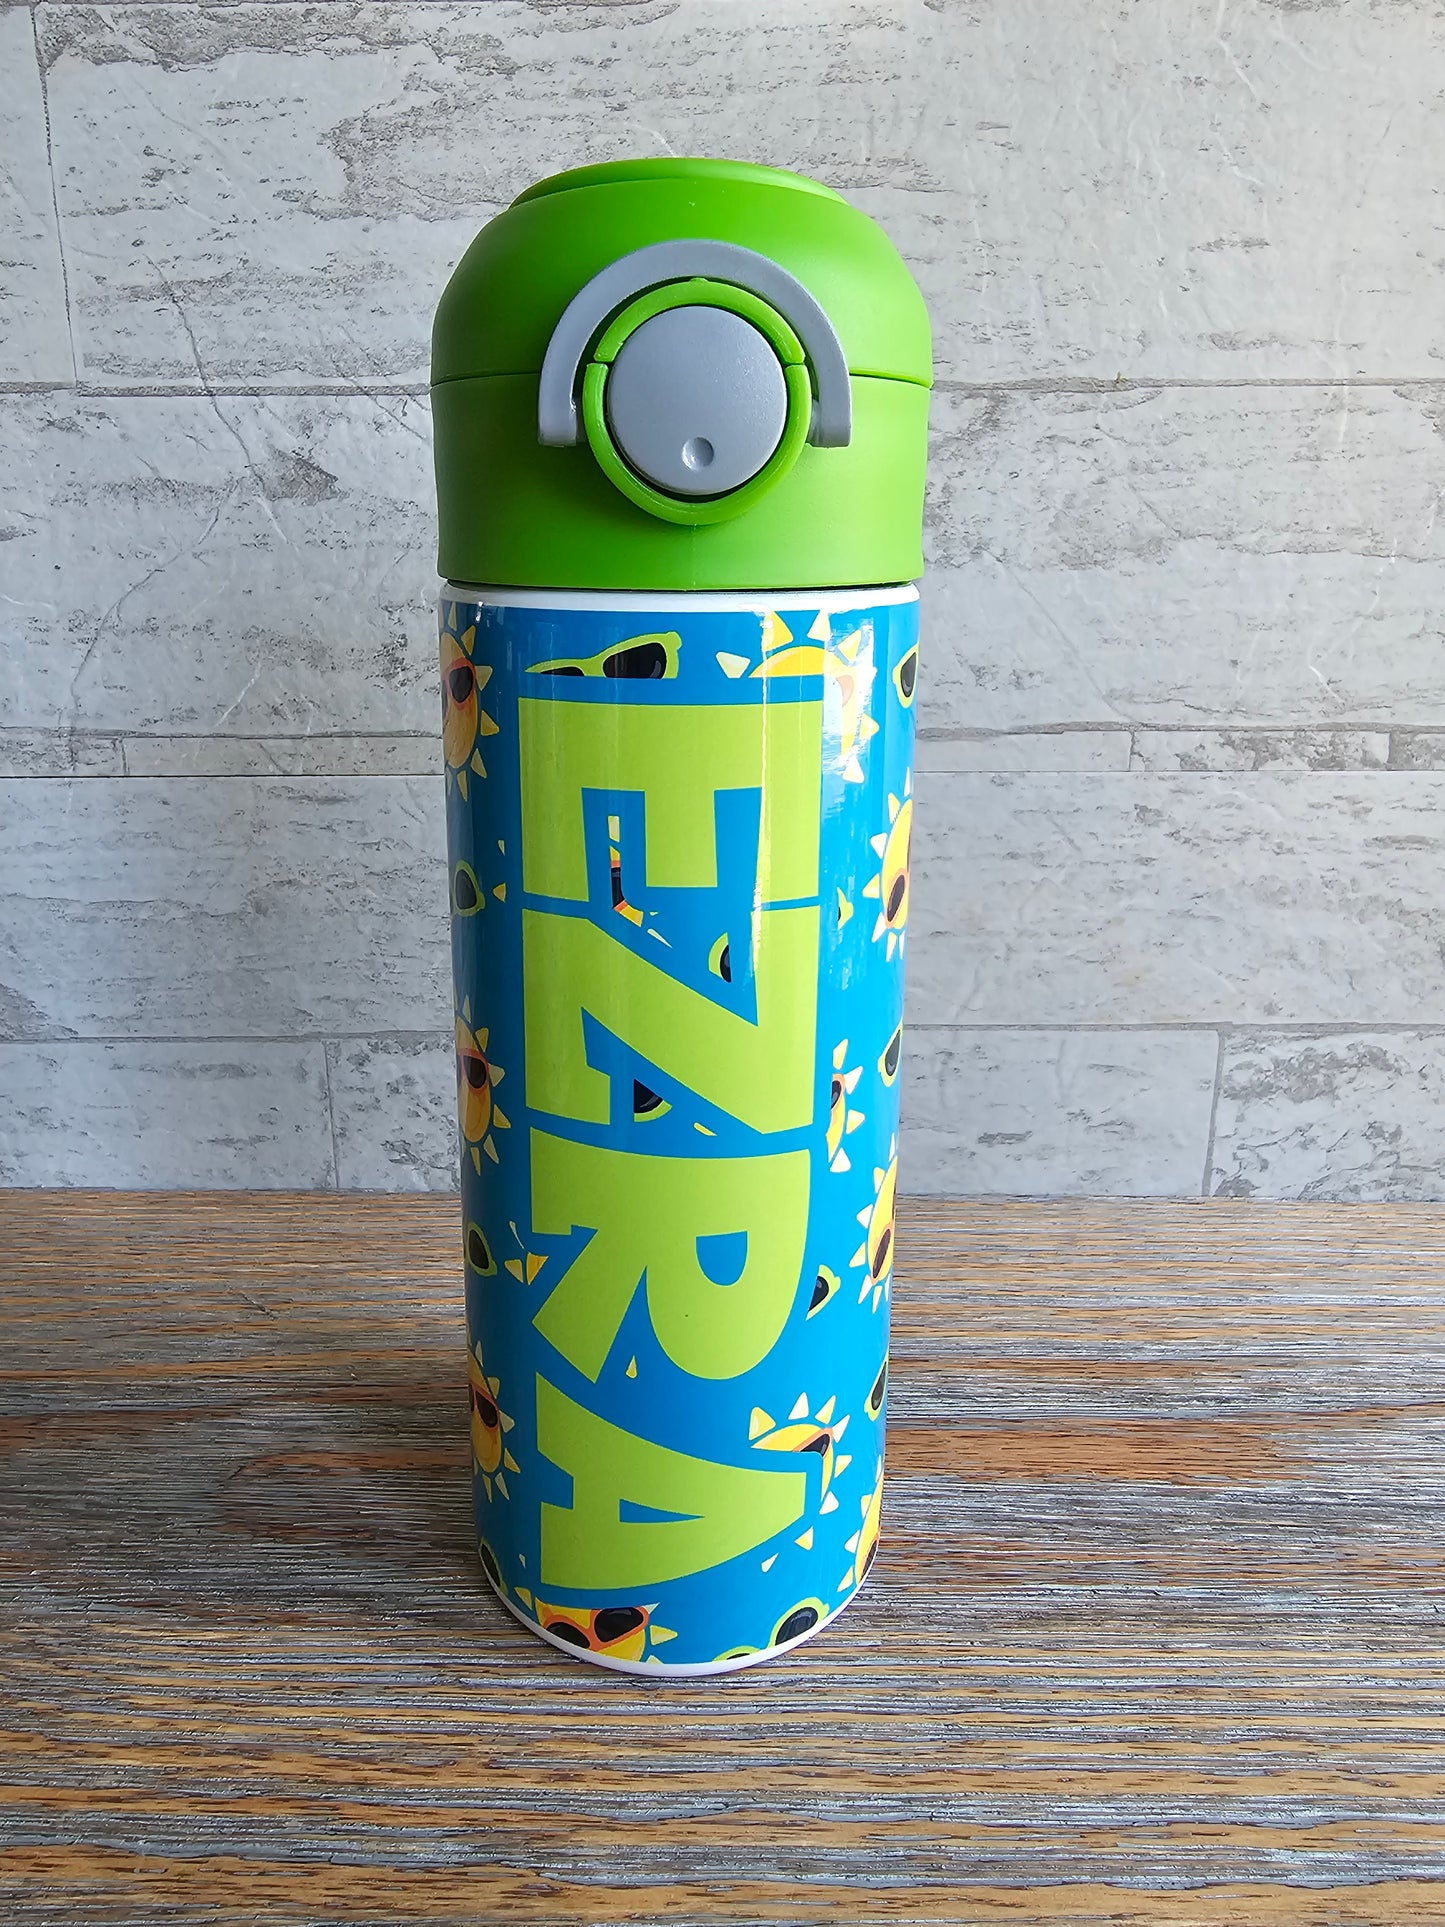 Blue and Green Sunglasses Flip Top Water Bottle - Personalized